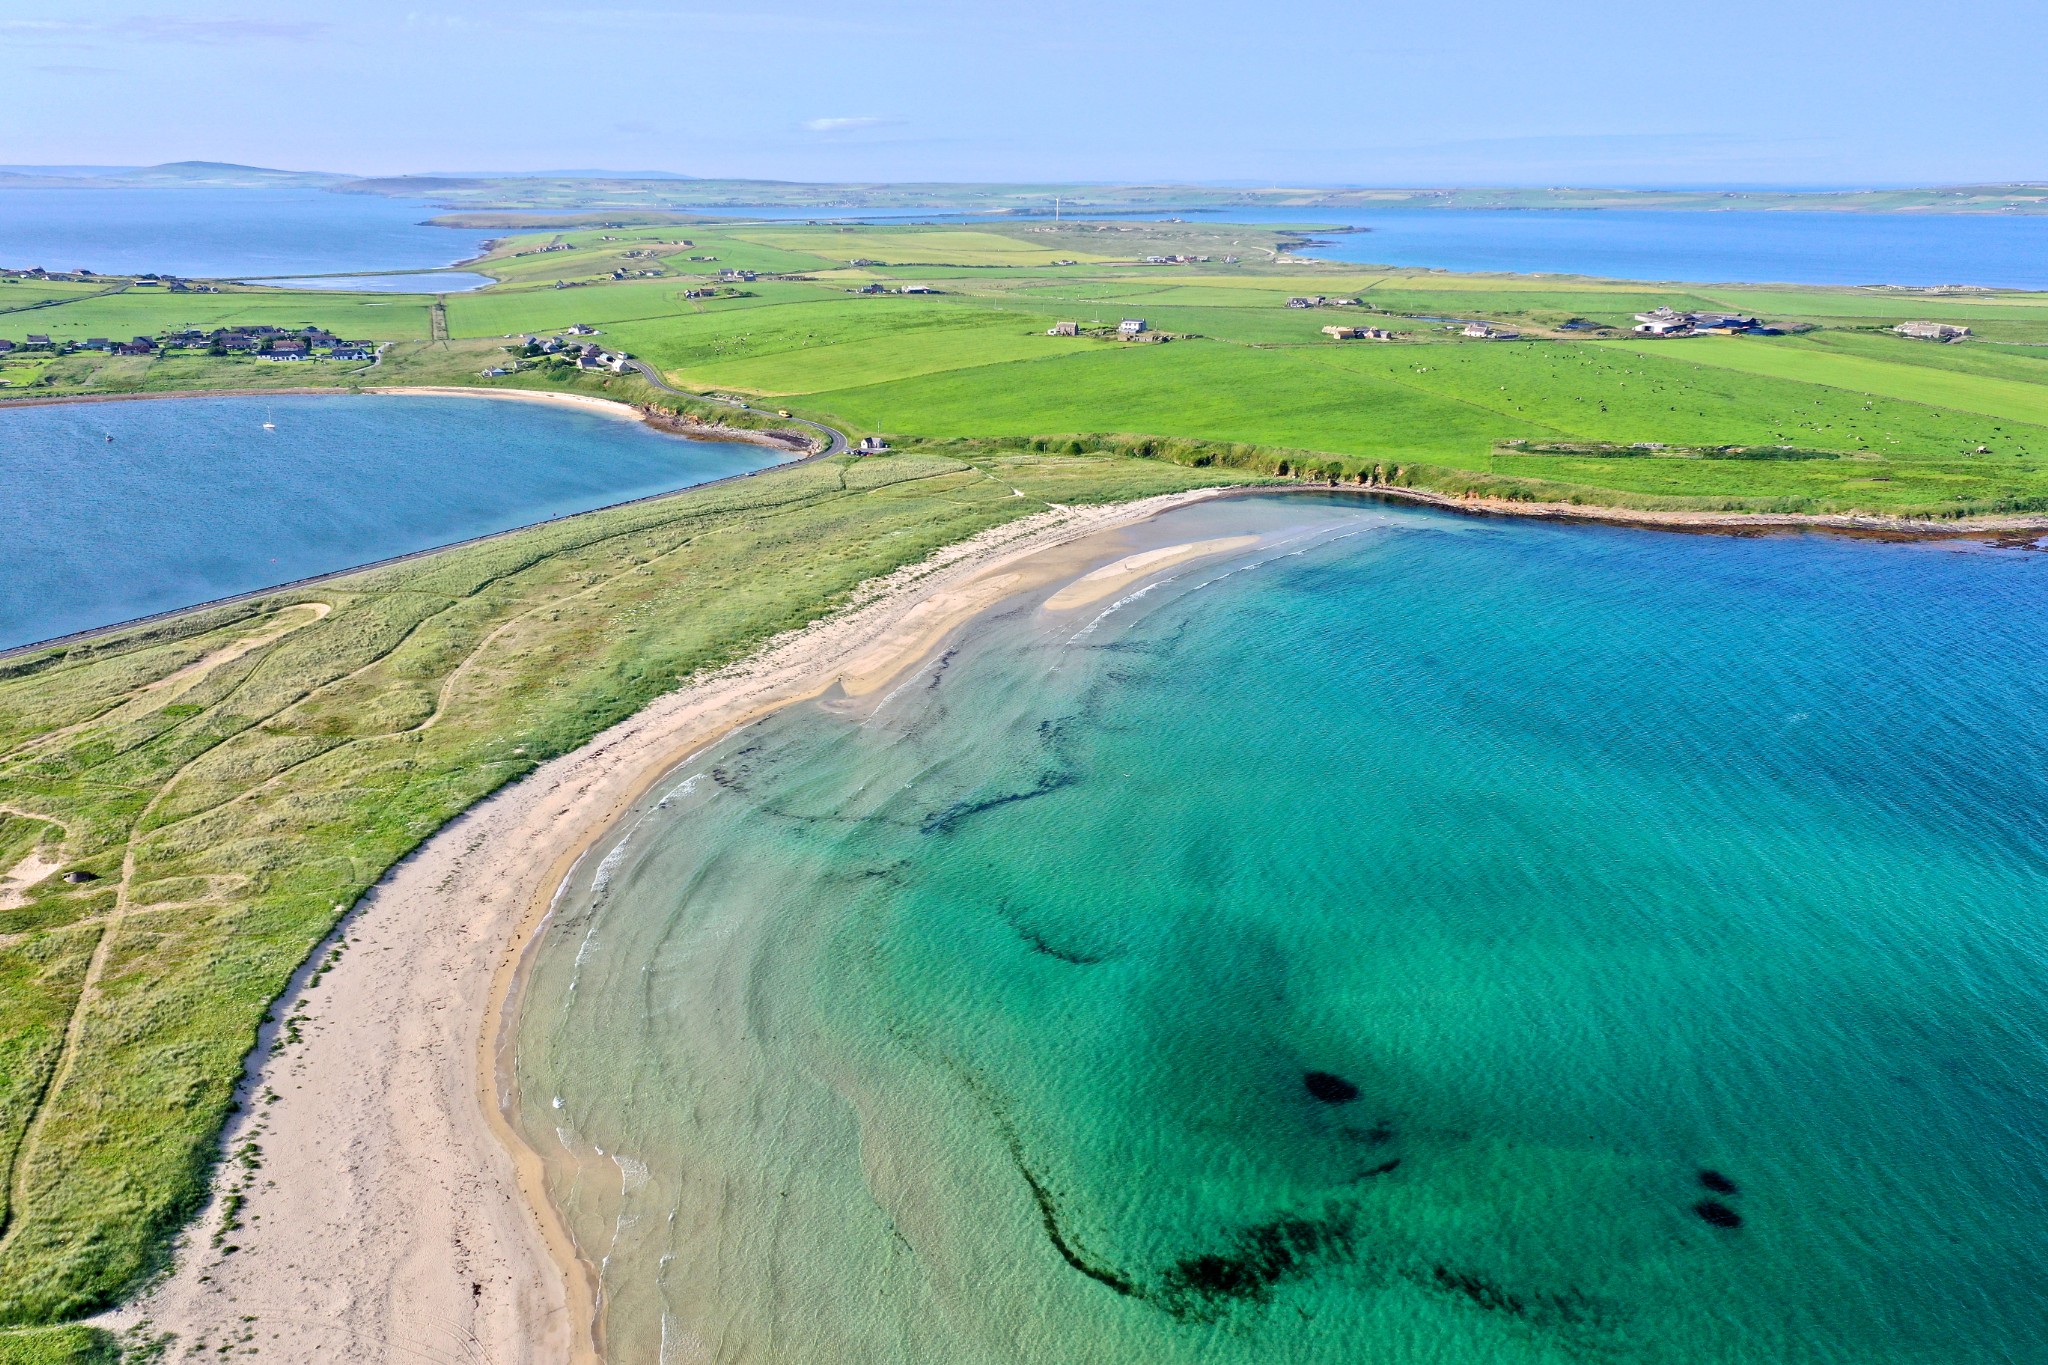 View over the fourth Churchill Barrier, Orkney - image by Colin Keldie